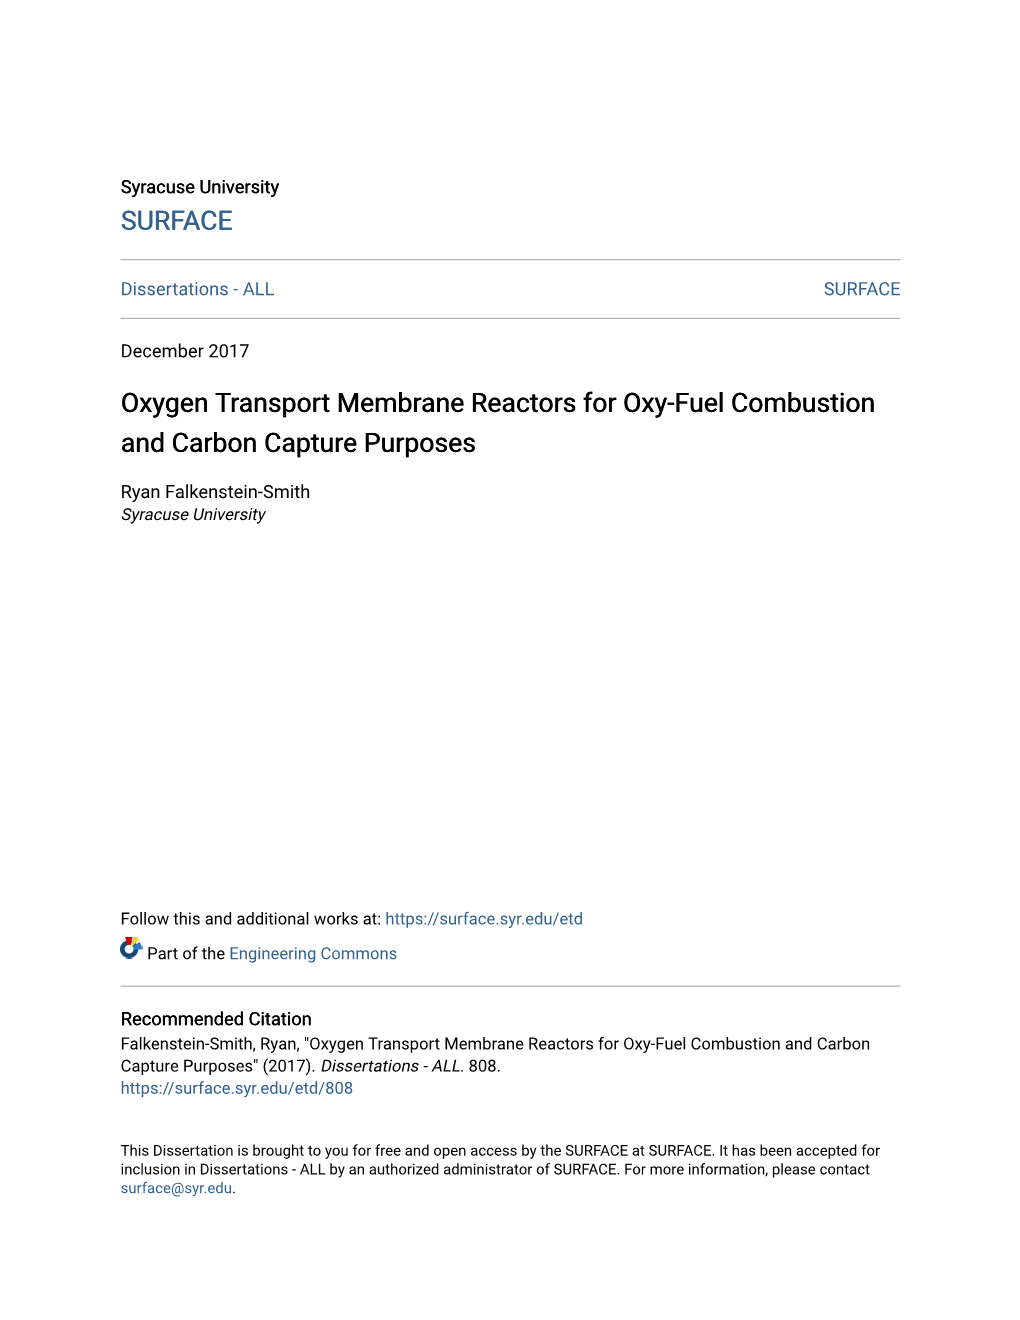 Oxygen Transport Membrane Reactors for Oxy-Fuel Combustion and Carbon Capture Purposes